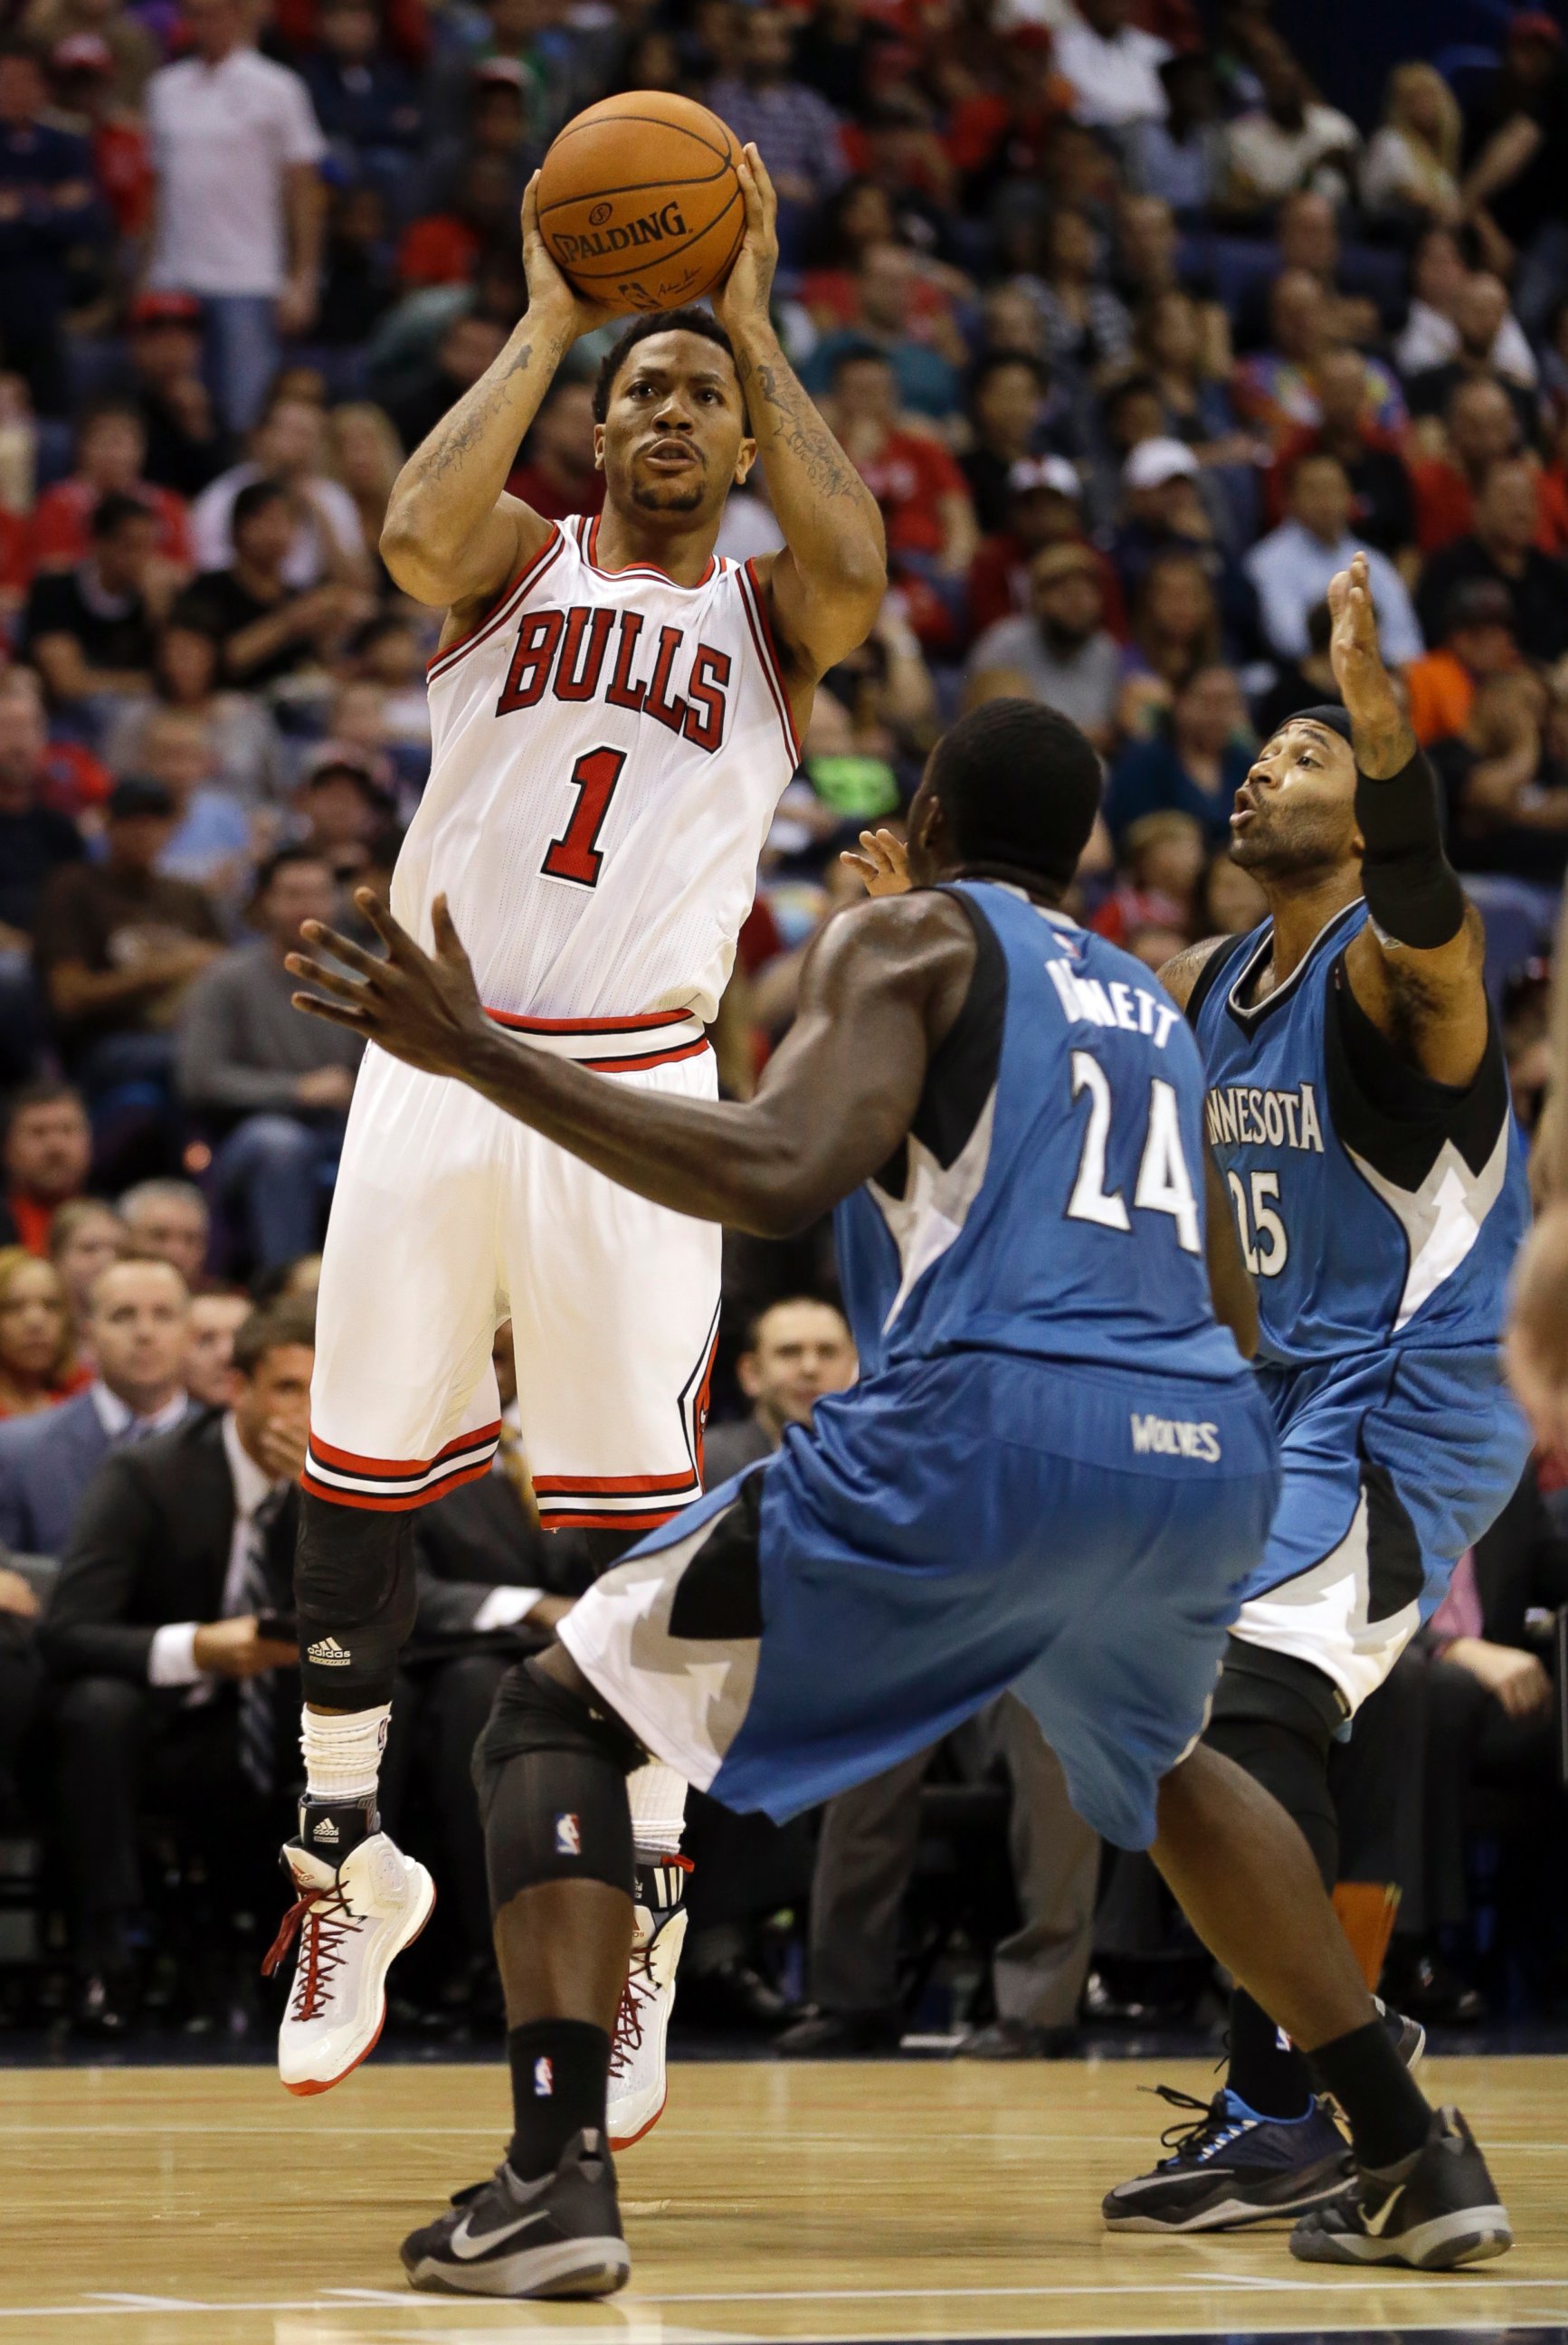 PHOTO: Chicago Bulls' Derrick Rose, left, shoots as Minnesota Timberwolves' Anthony Bennett and Mo Williams, right, defend during the first half of a preseason NBA basketball game on Oct. 24, 2014, in St. Louis. 